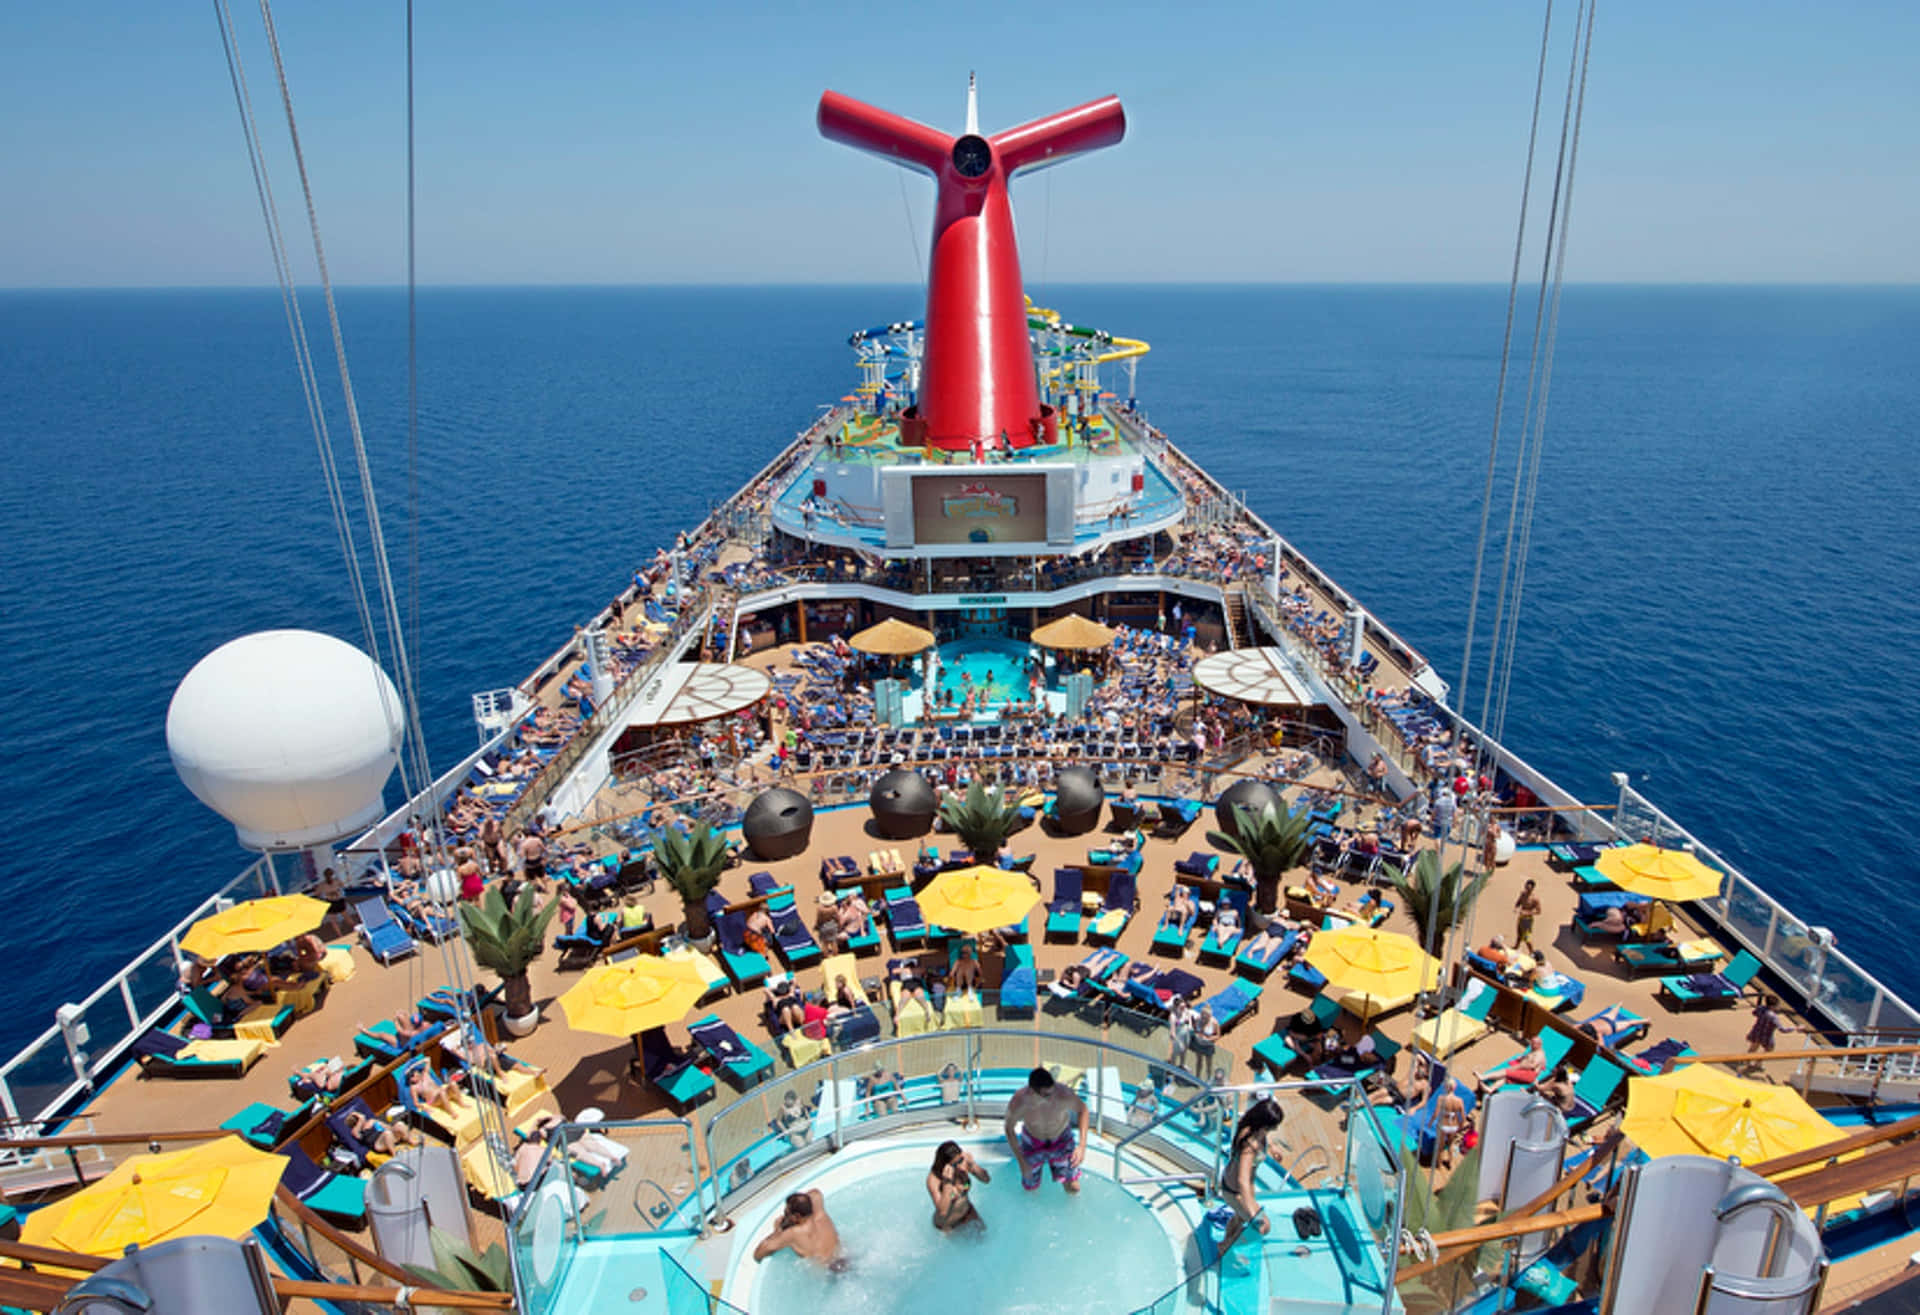 The Carnival Dream—boundless fun, relaxation and adventure